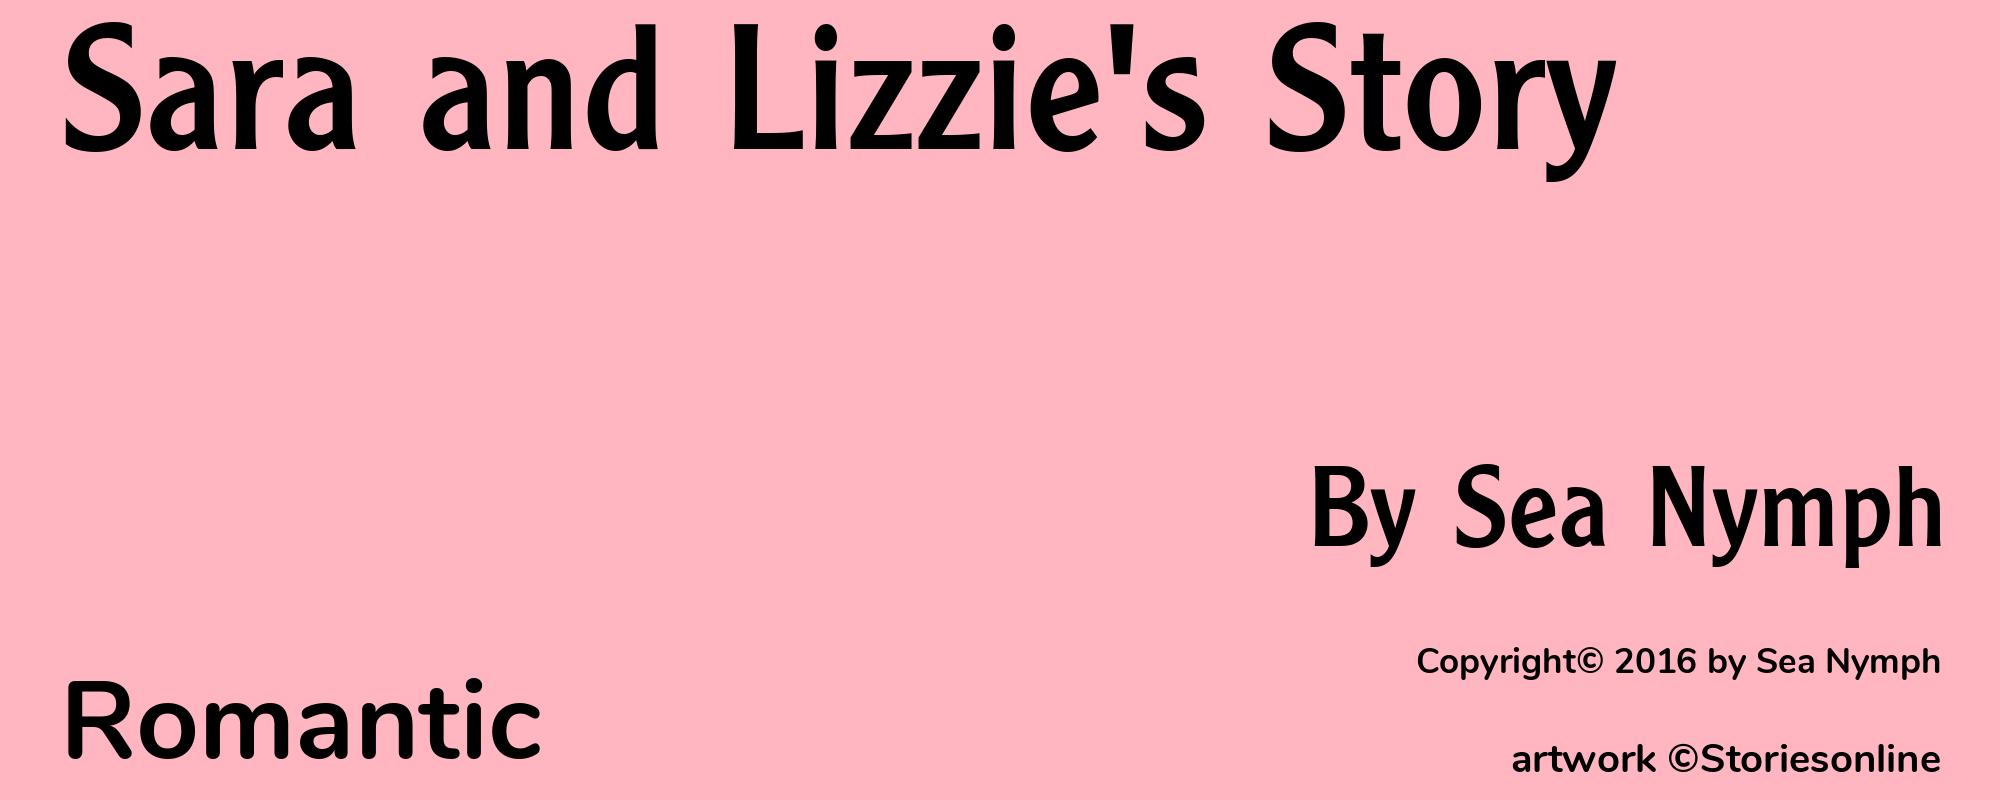 Sara and Lizzie's Story - Cover